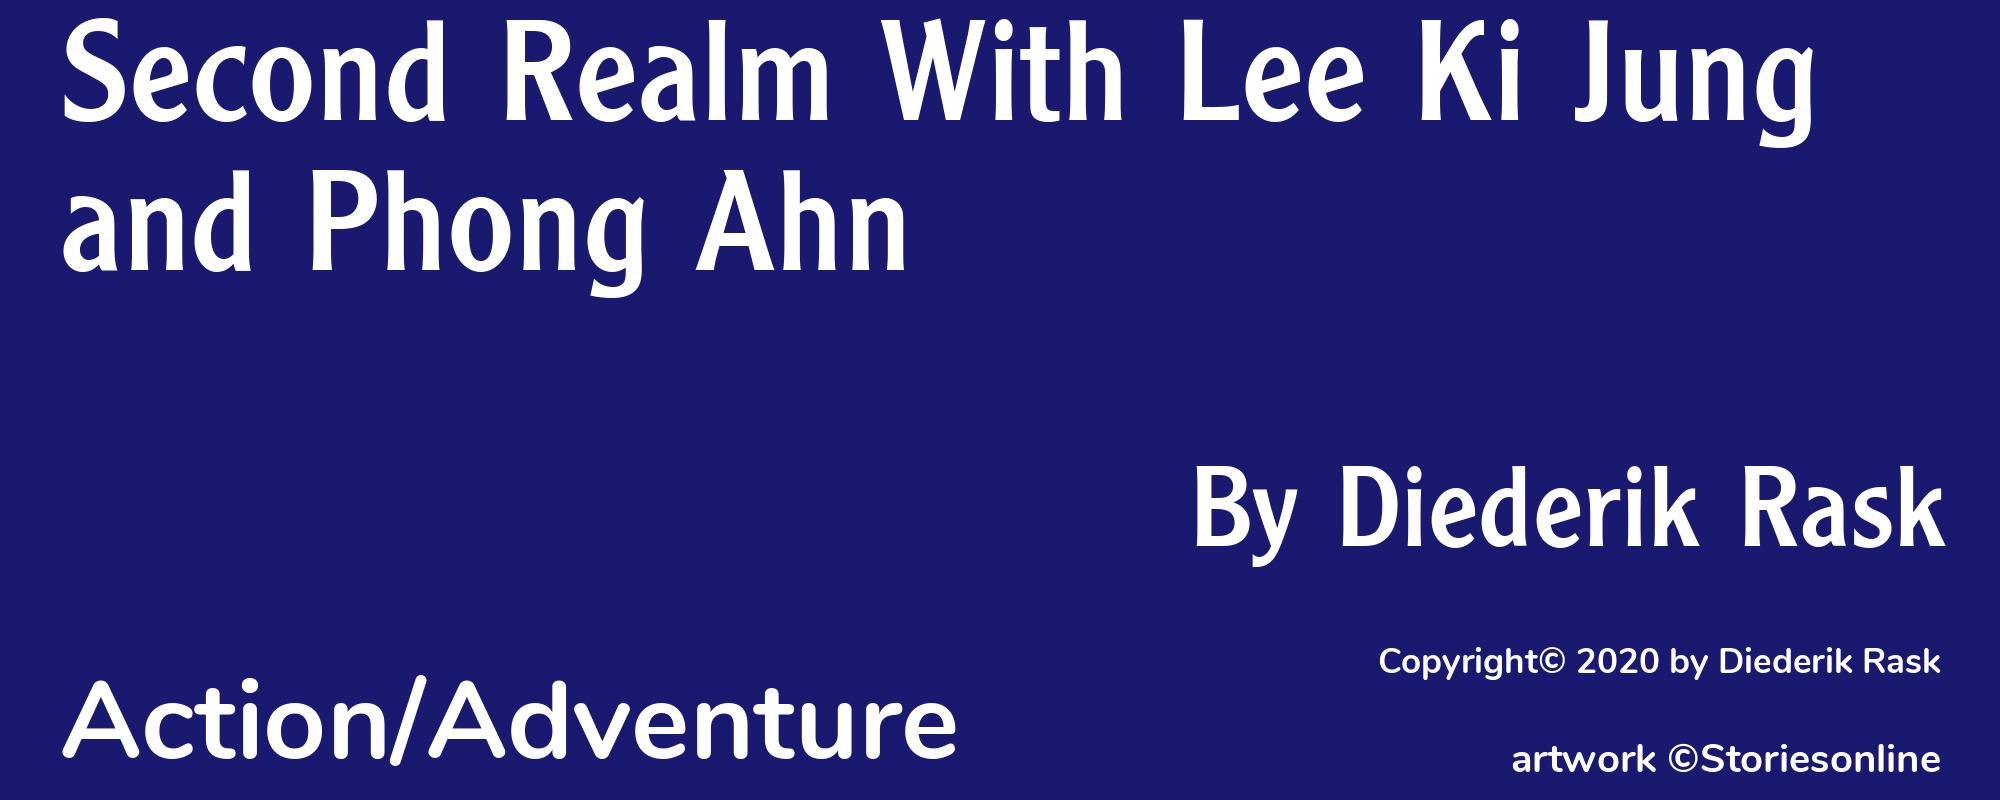 Second Realm With Lee Ki Jung and Phong Ahn - Cover